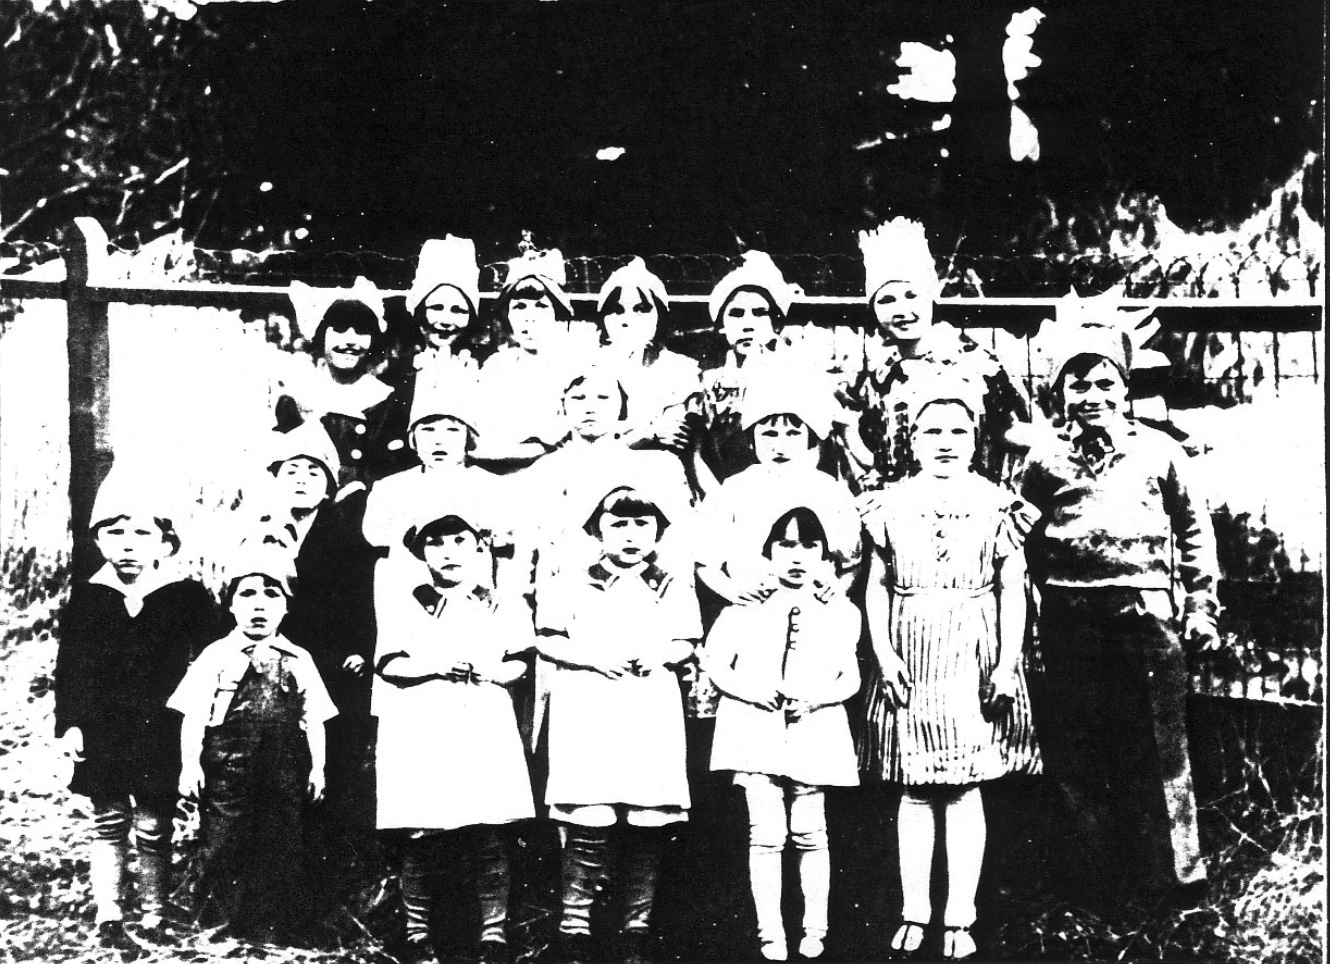 Seventeen children in three rows wearing party hats